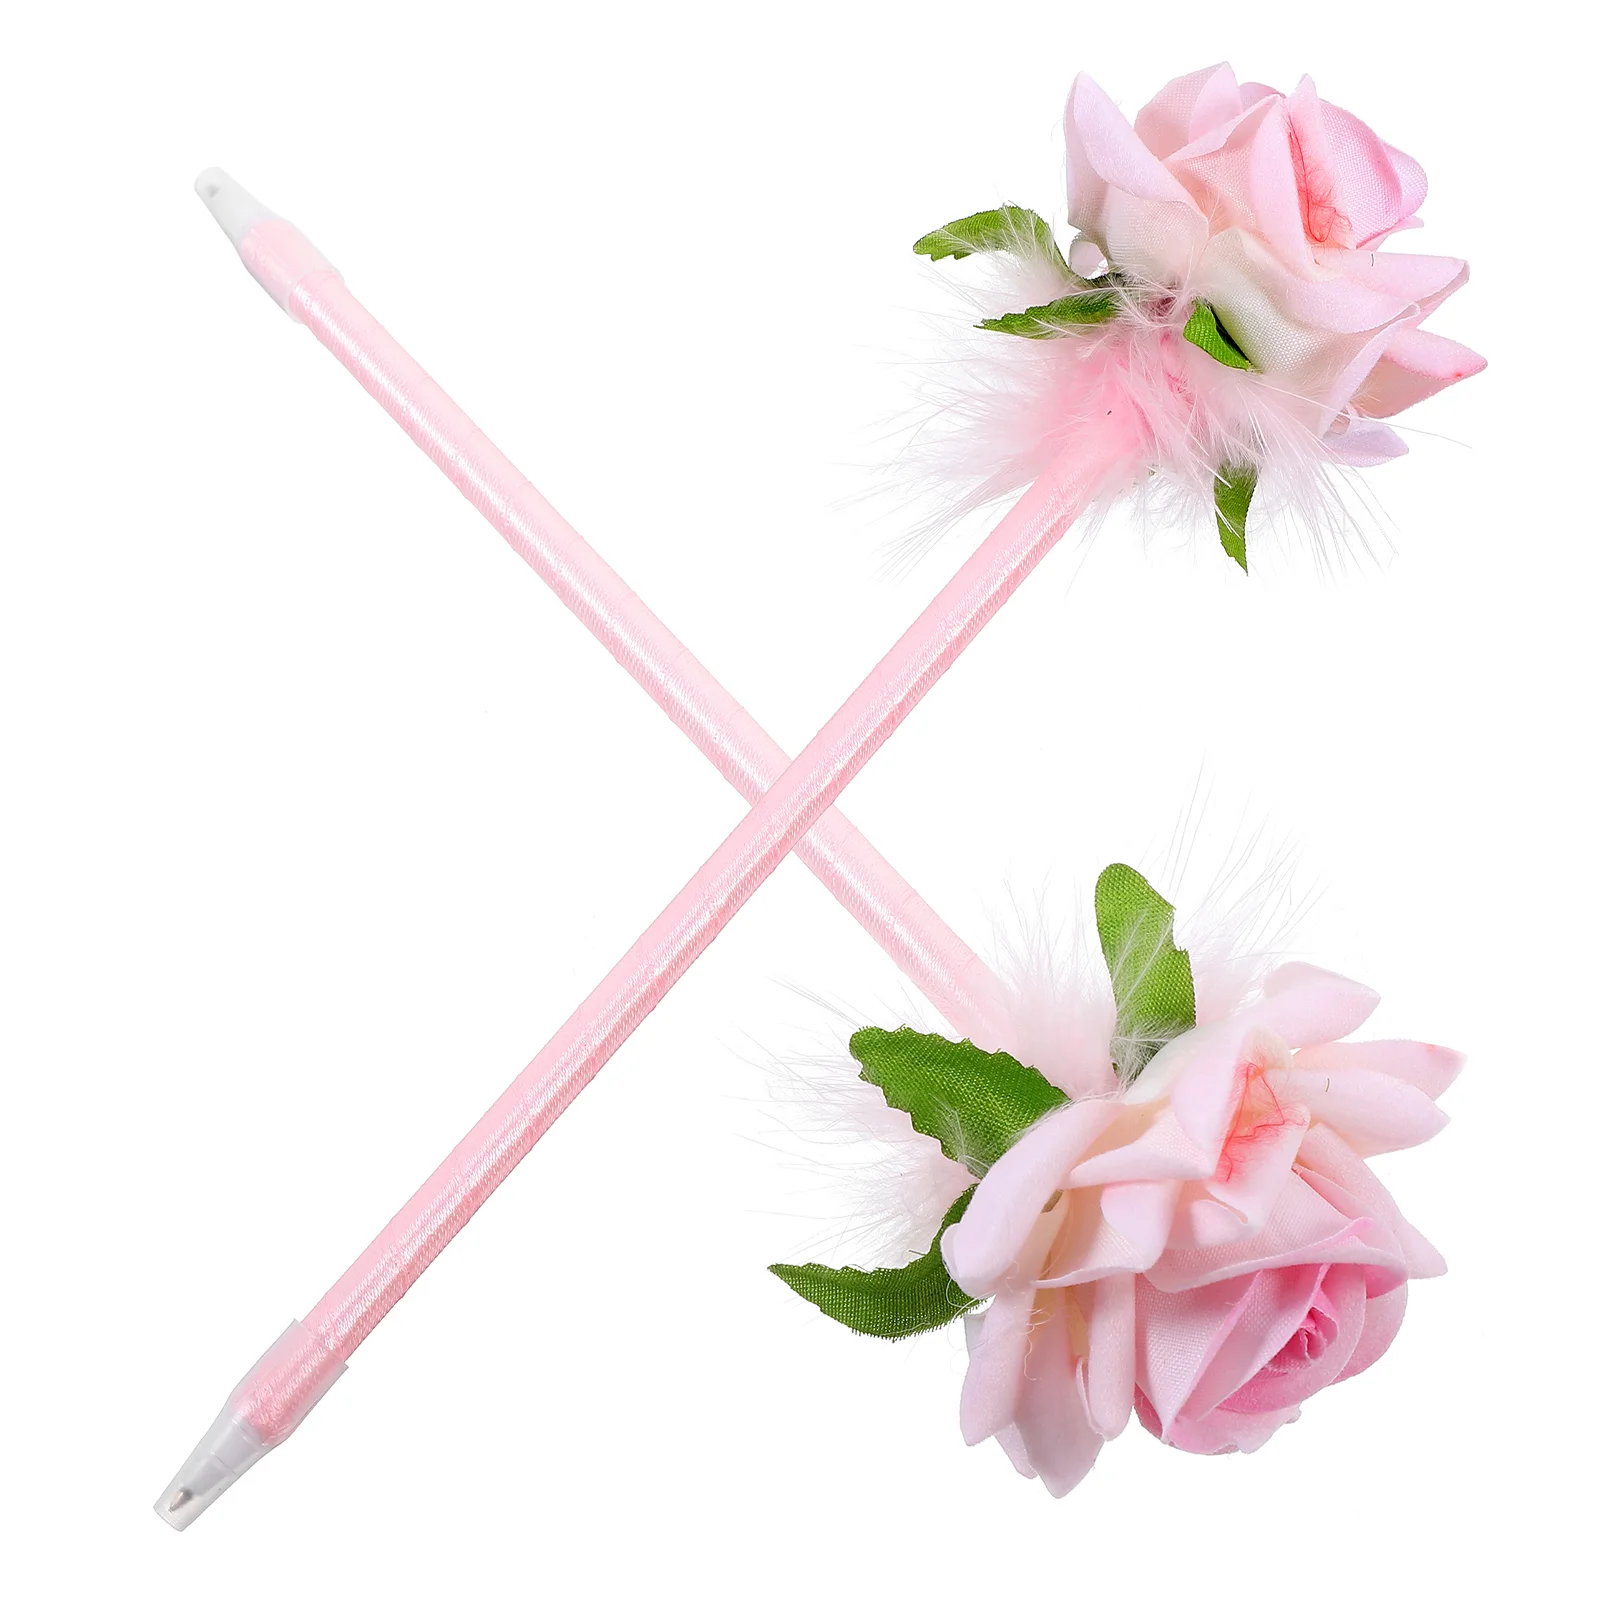 

2 Pcs Bulk Rose Ballpoint Pen Flower Color Changing Pens Plastic Cute Stationery Items Simulated